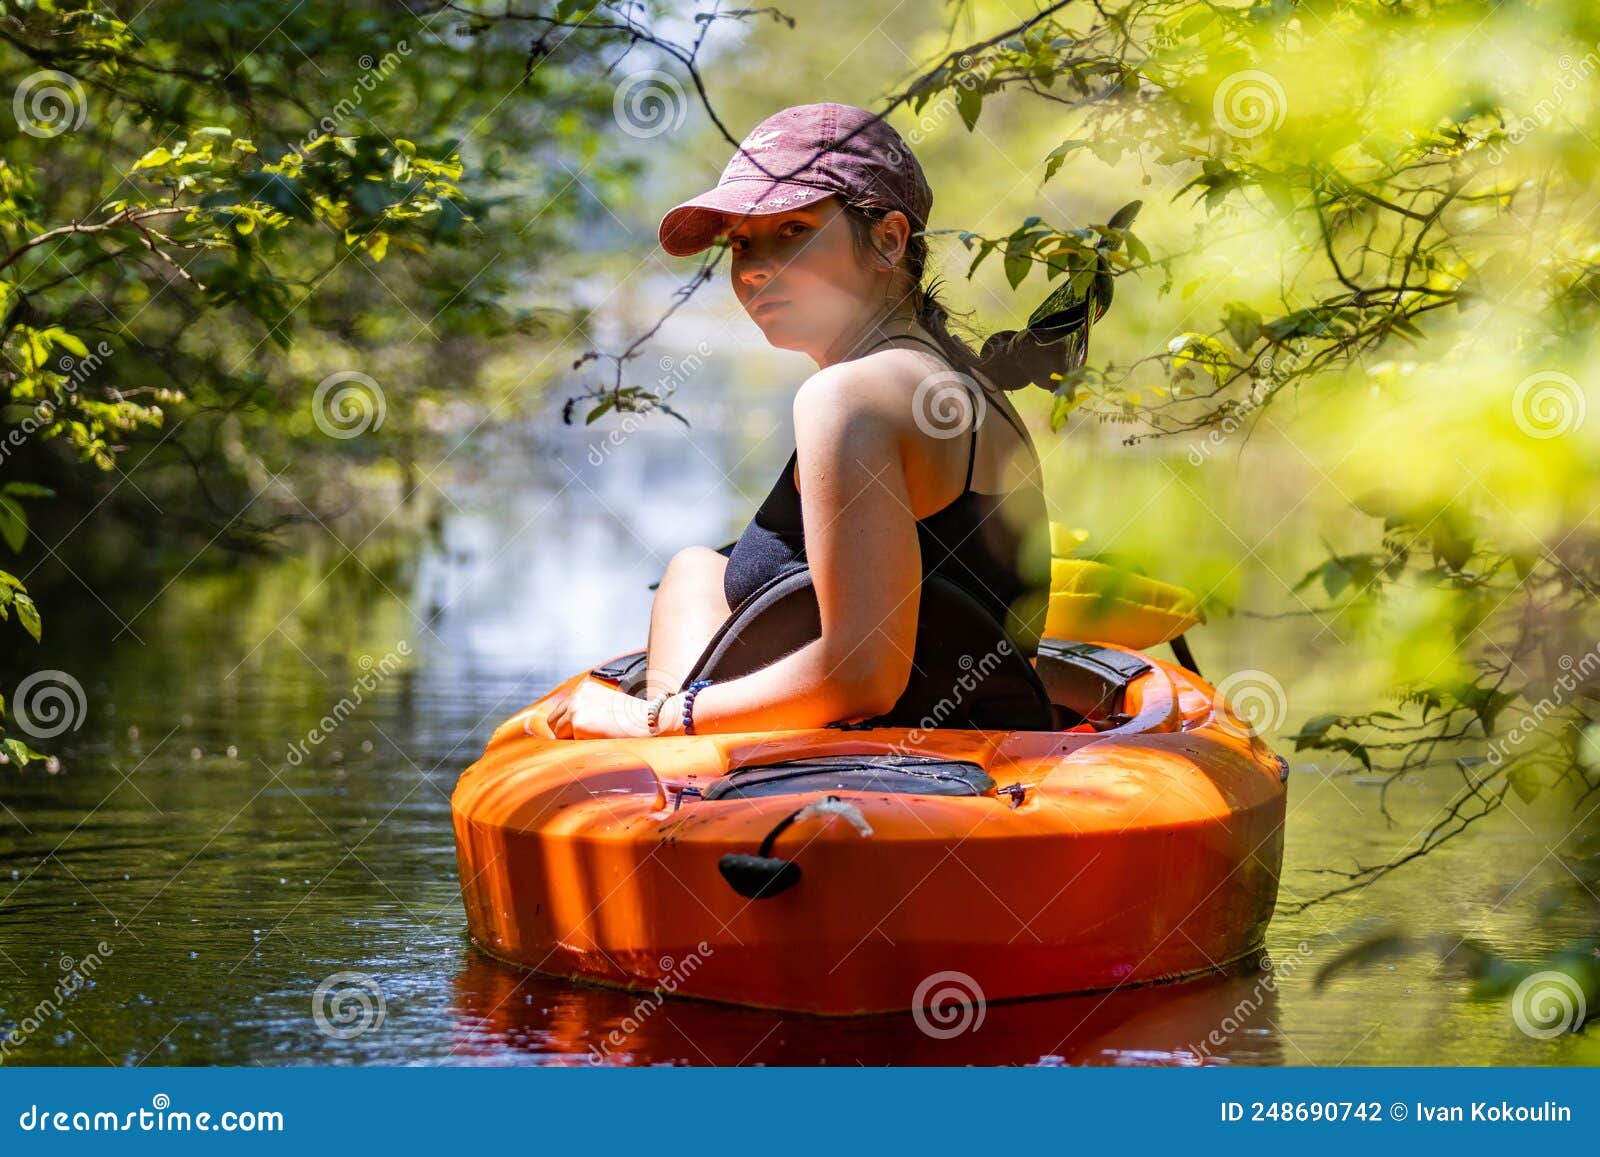 Young Attractive Girl Paddling in Canoe Still Water Stock Photo - Image ...